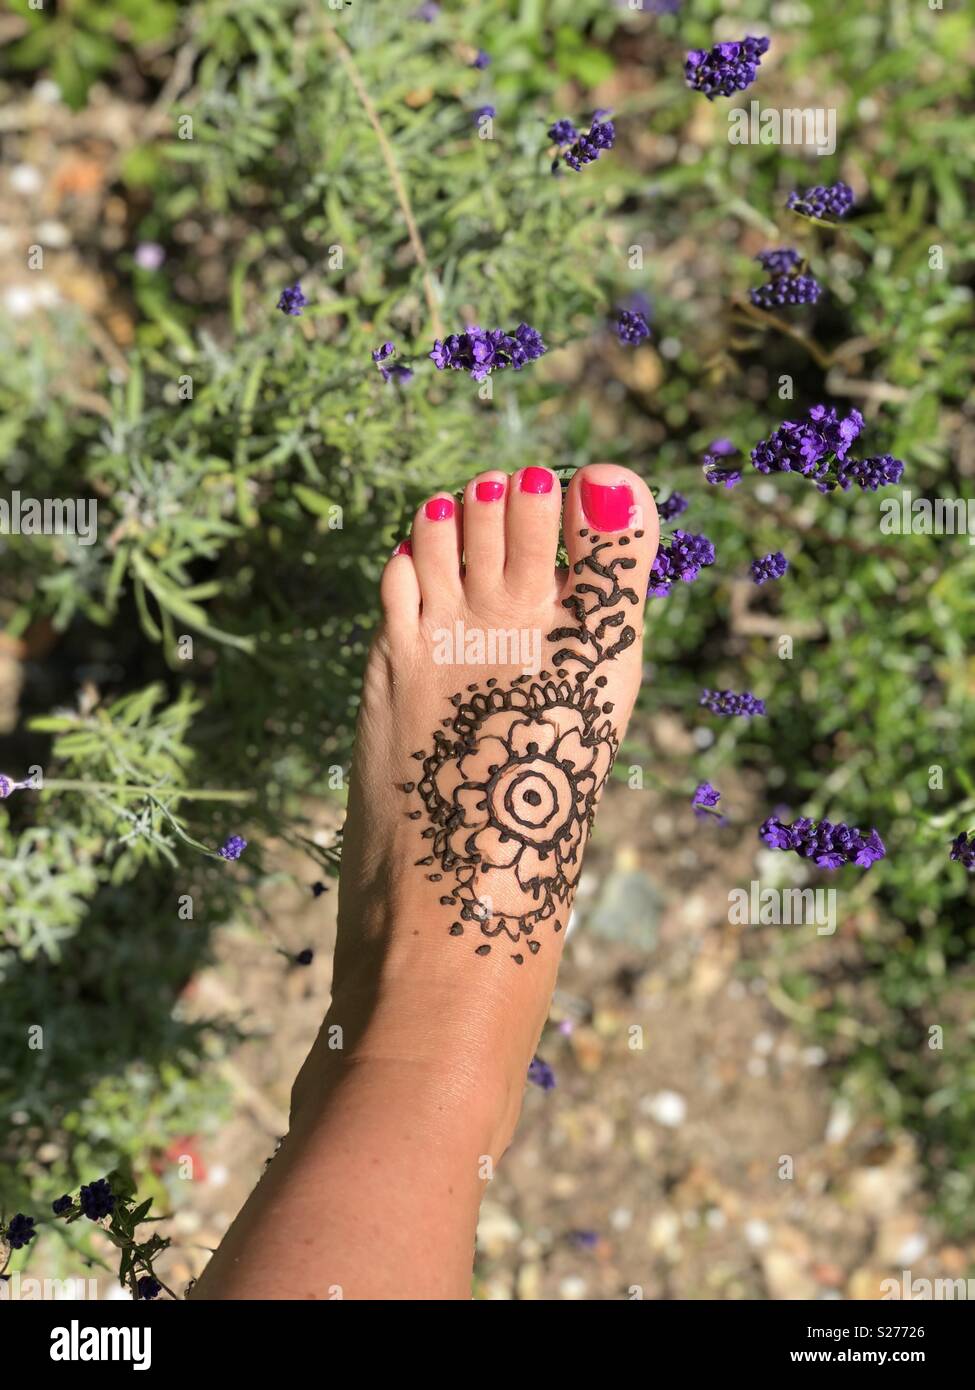 Summer party in the garden mendhi pattern on foot. Stock Photo